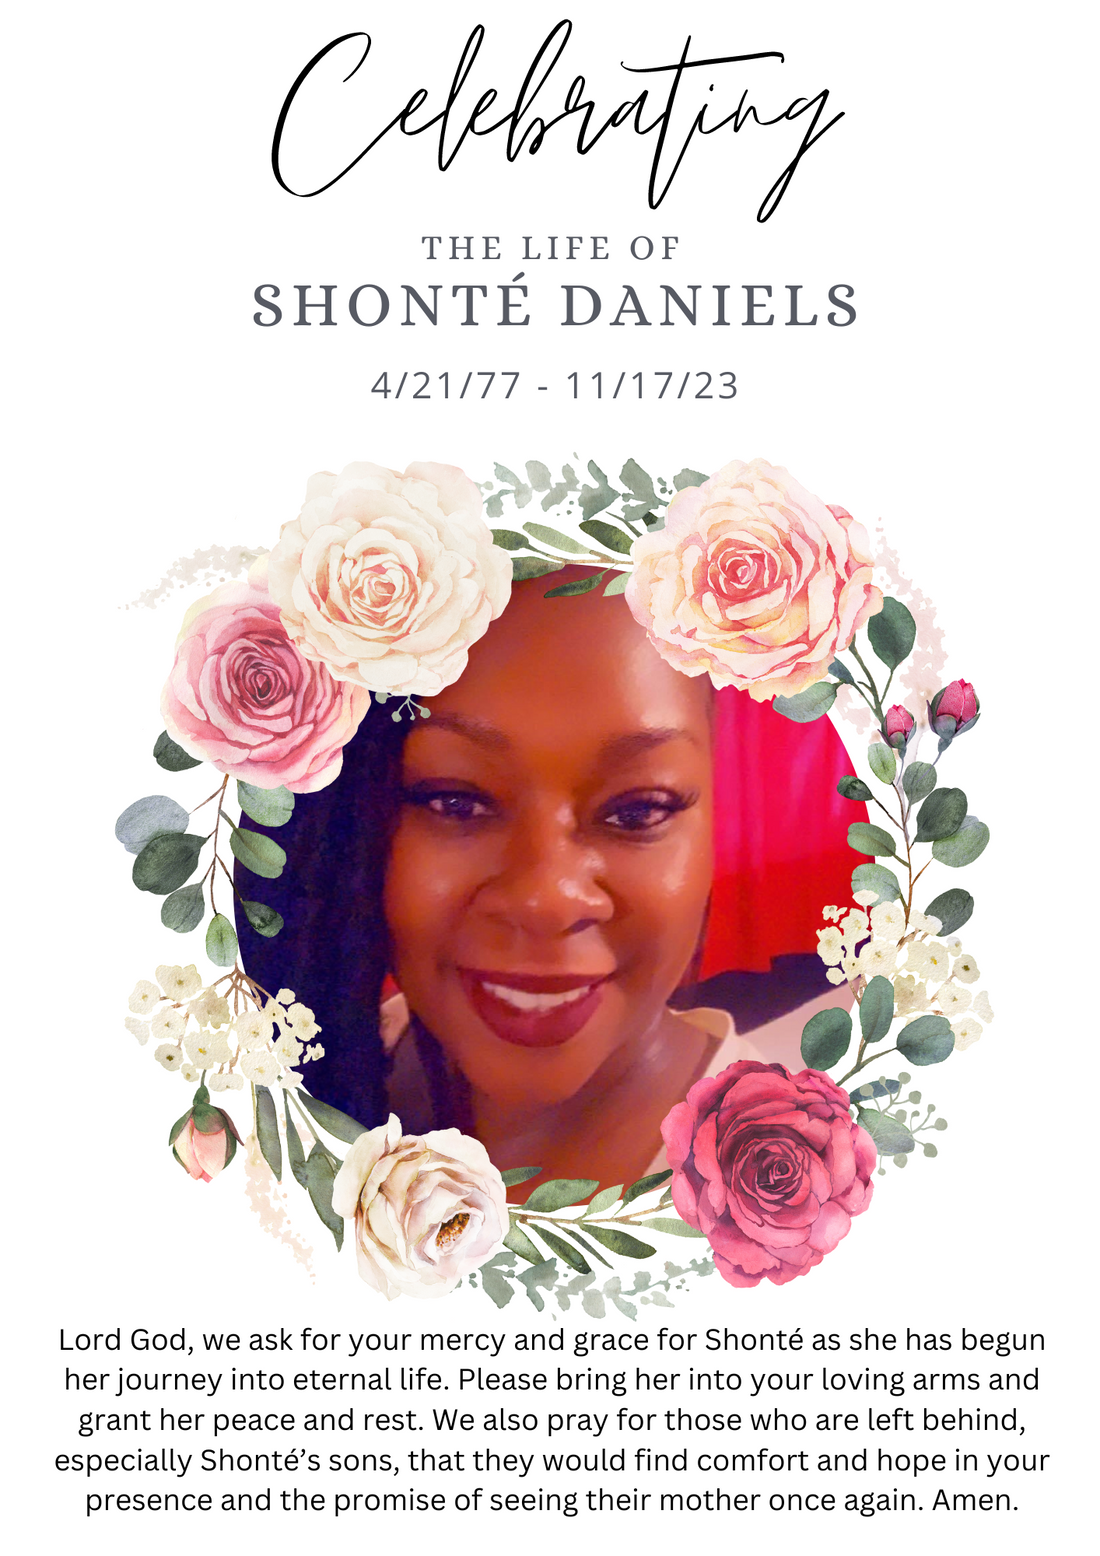 In Memory of our sister, Shonté Daniels